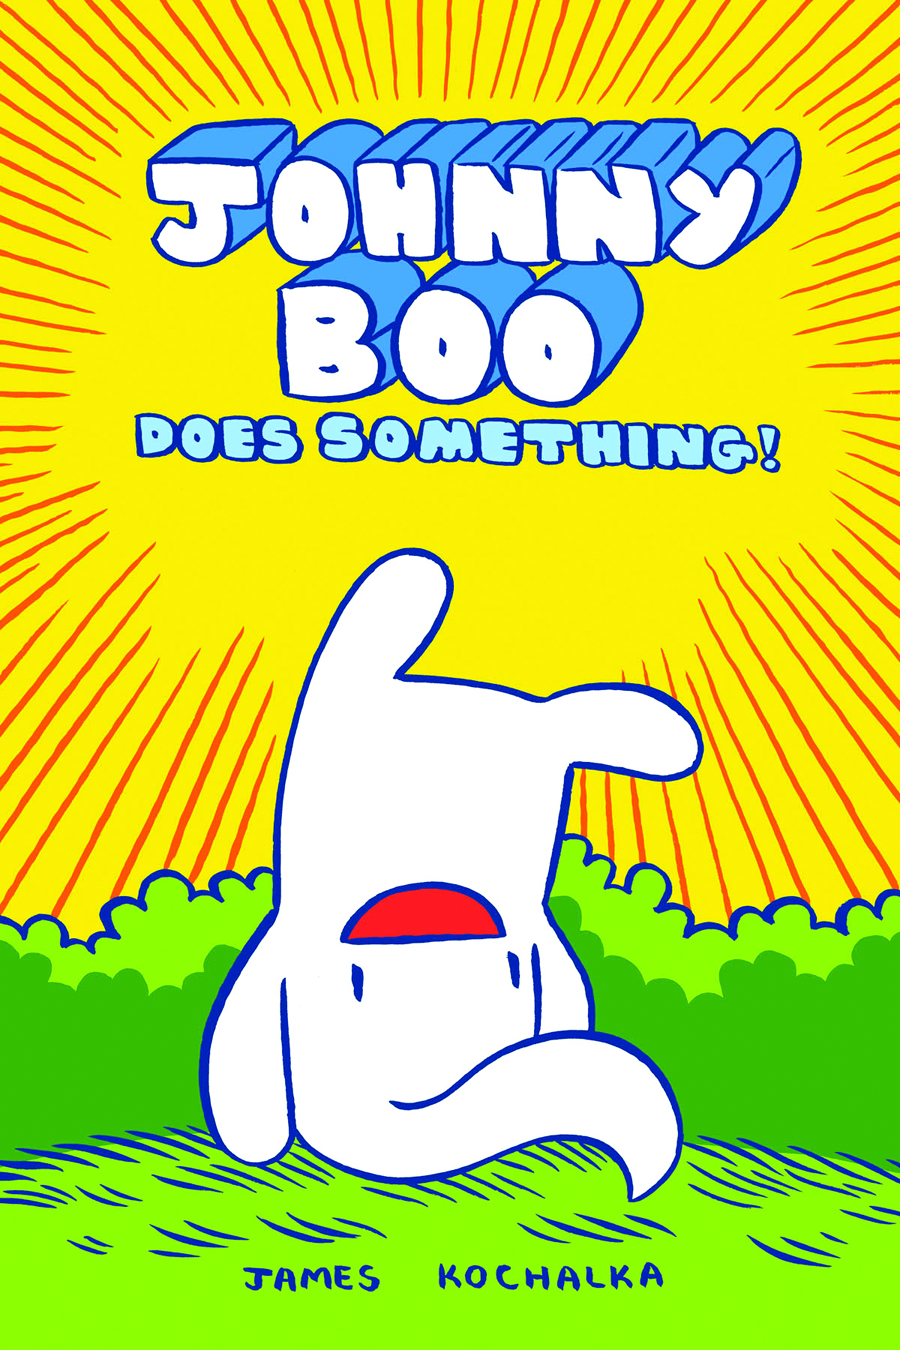 Johnny Boo Hardcover Volume 5 Does Something